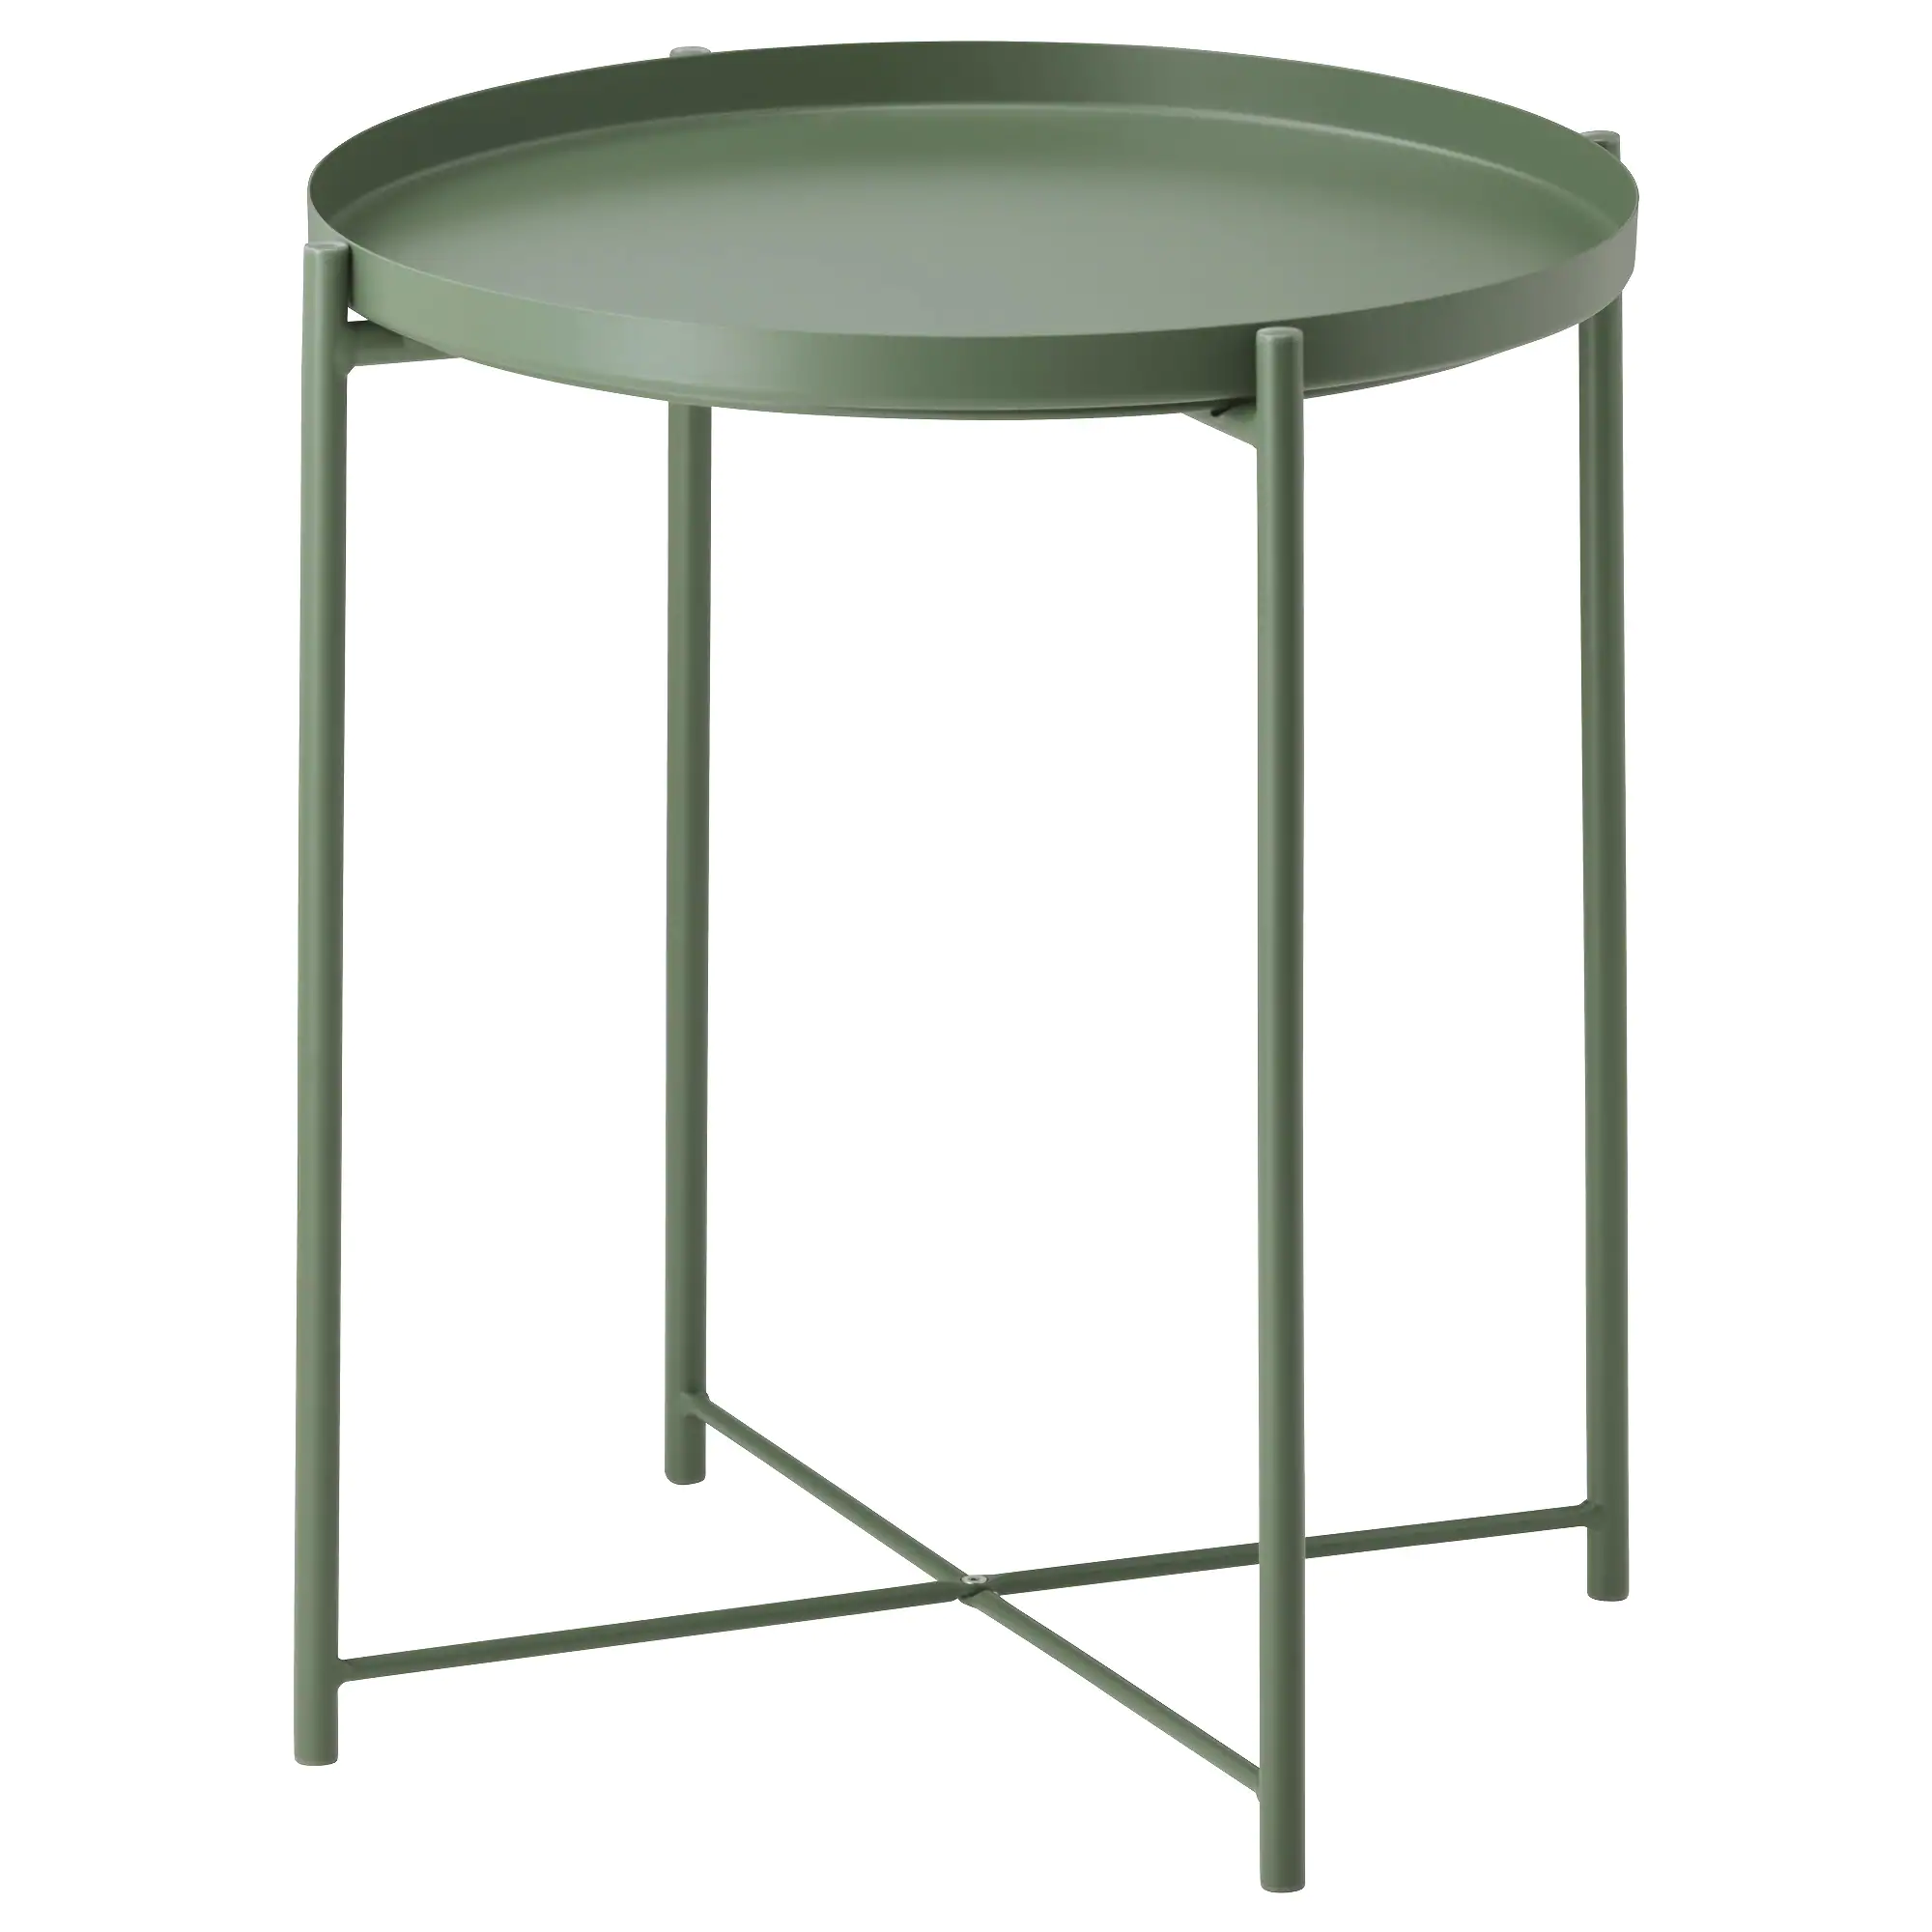 gladom tray table dark green ikea metal garden accent target pottery barn beds high victorian style side door room divider sheesham console end marble inexpensive patio furniture